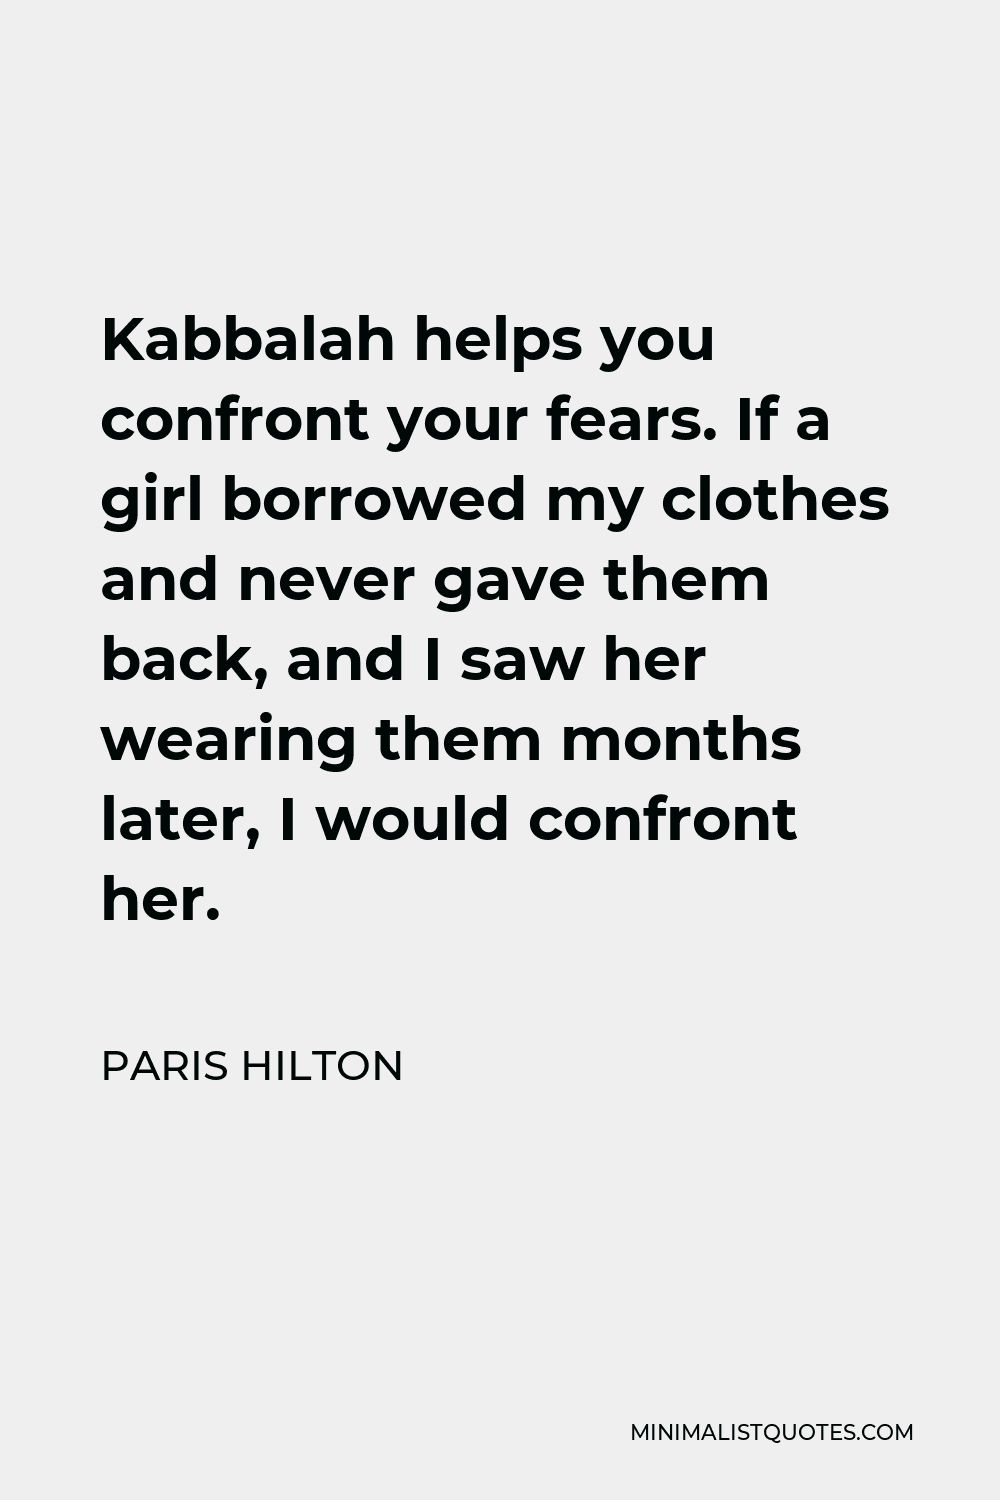 Paris Hilton Quote - Kabbalah helps you confront your fears. If a girl borrowed my clothes and never gave them back, and I saw her wearing them months later, I would confront her.